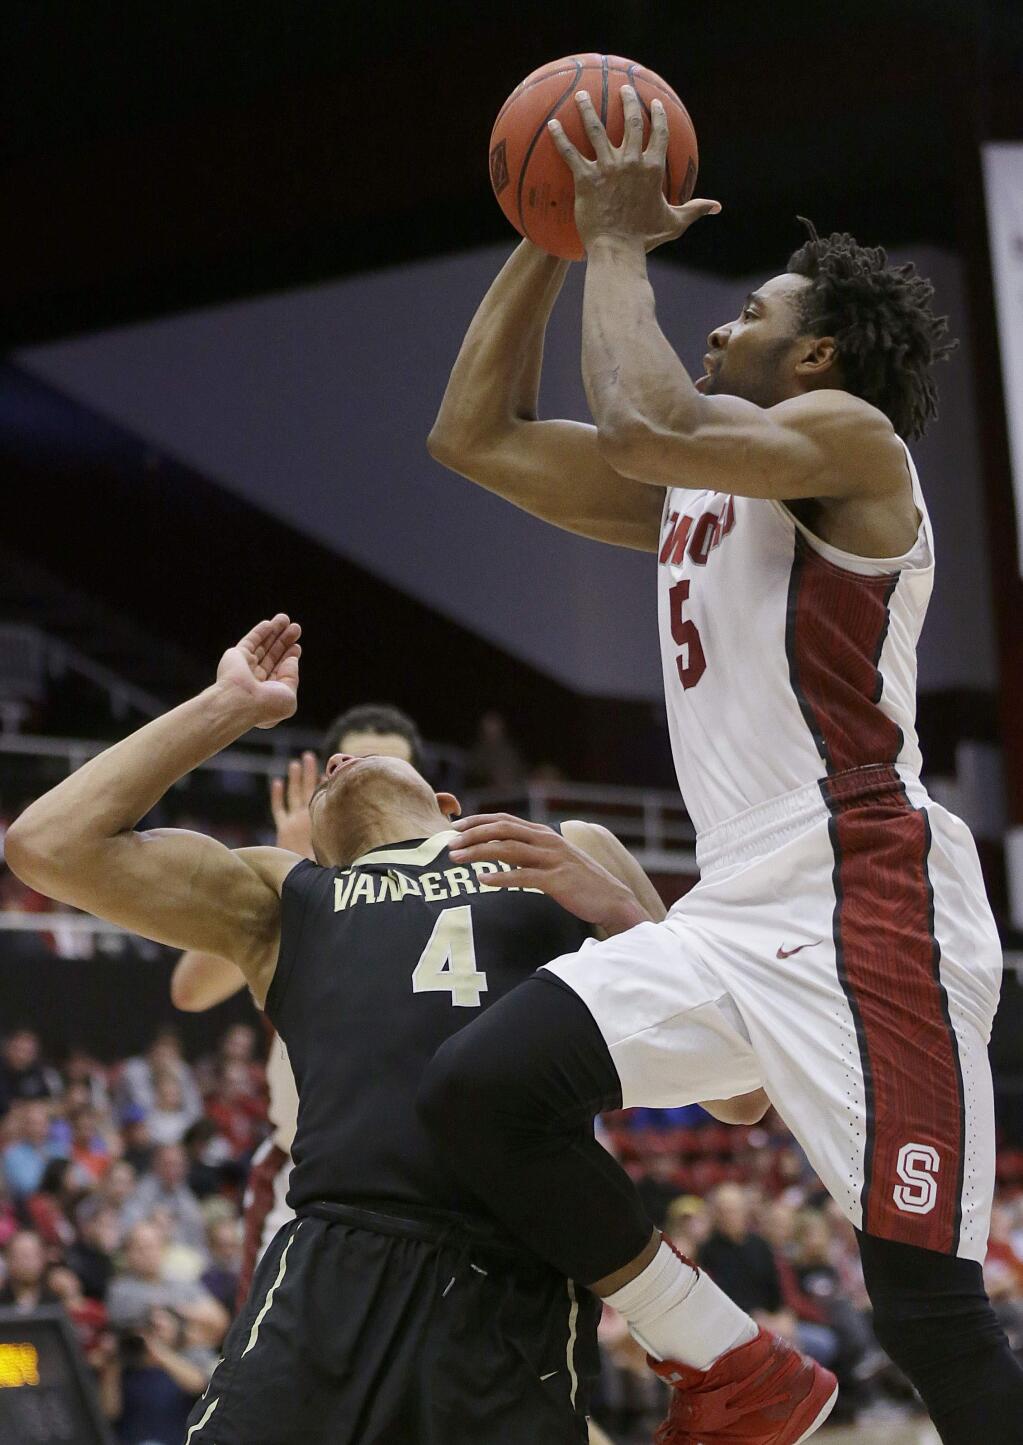 Stanford's Chasson Randle, right, shoots against Vanderbilt's Wade Baldwin IV (4) during the second half of an NCAA college basketball game in the NIT in Stanford, Calif., Tuesday, March 24, 2015. Stanford won 78-75. (AP Photo/Jeff Chiu)